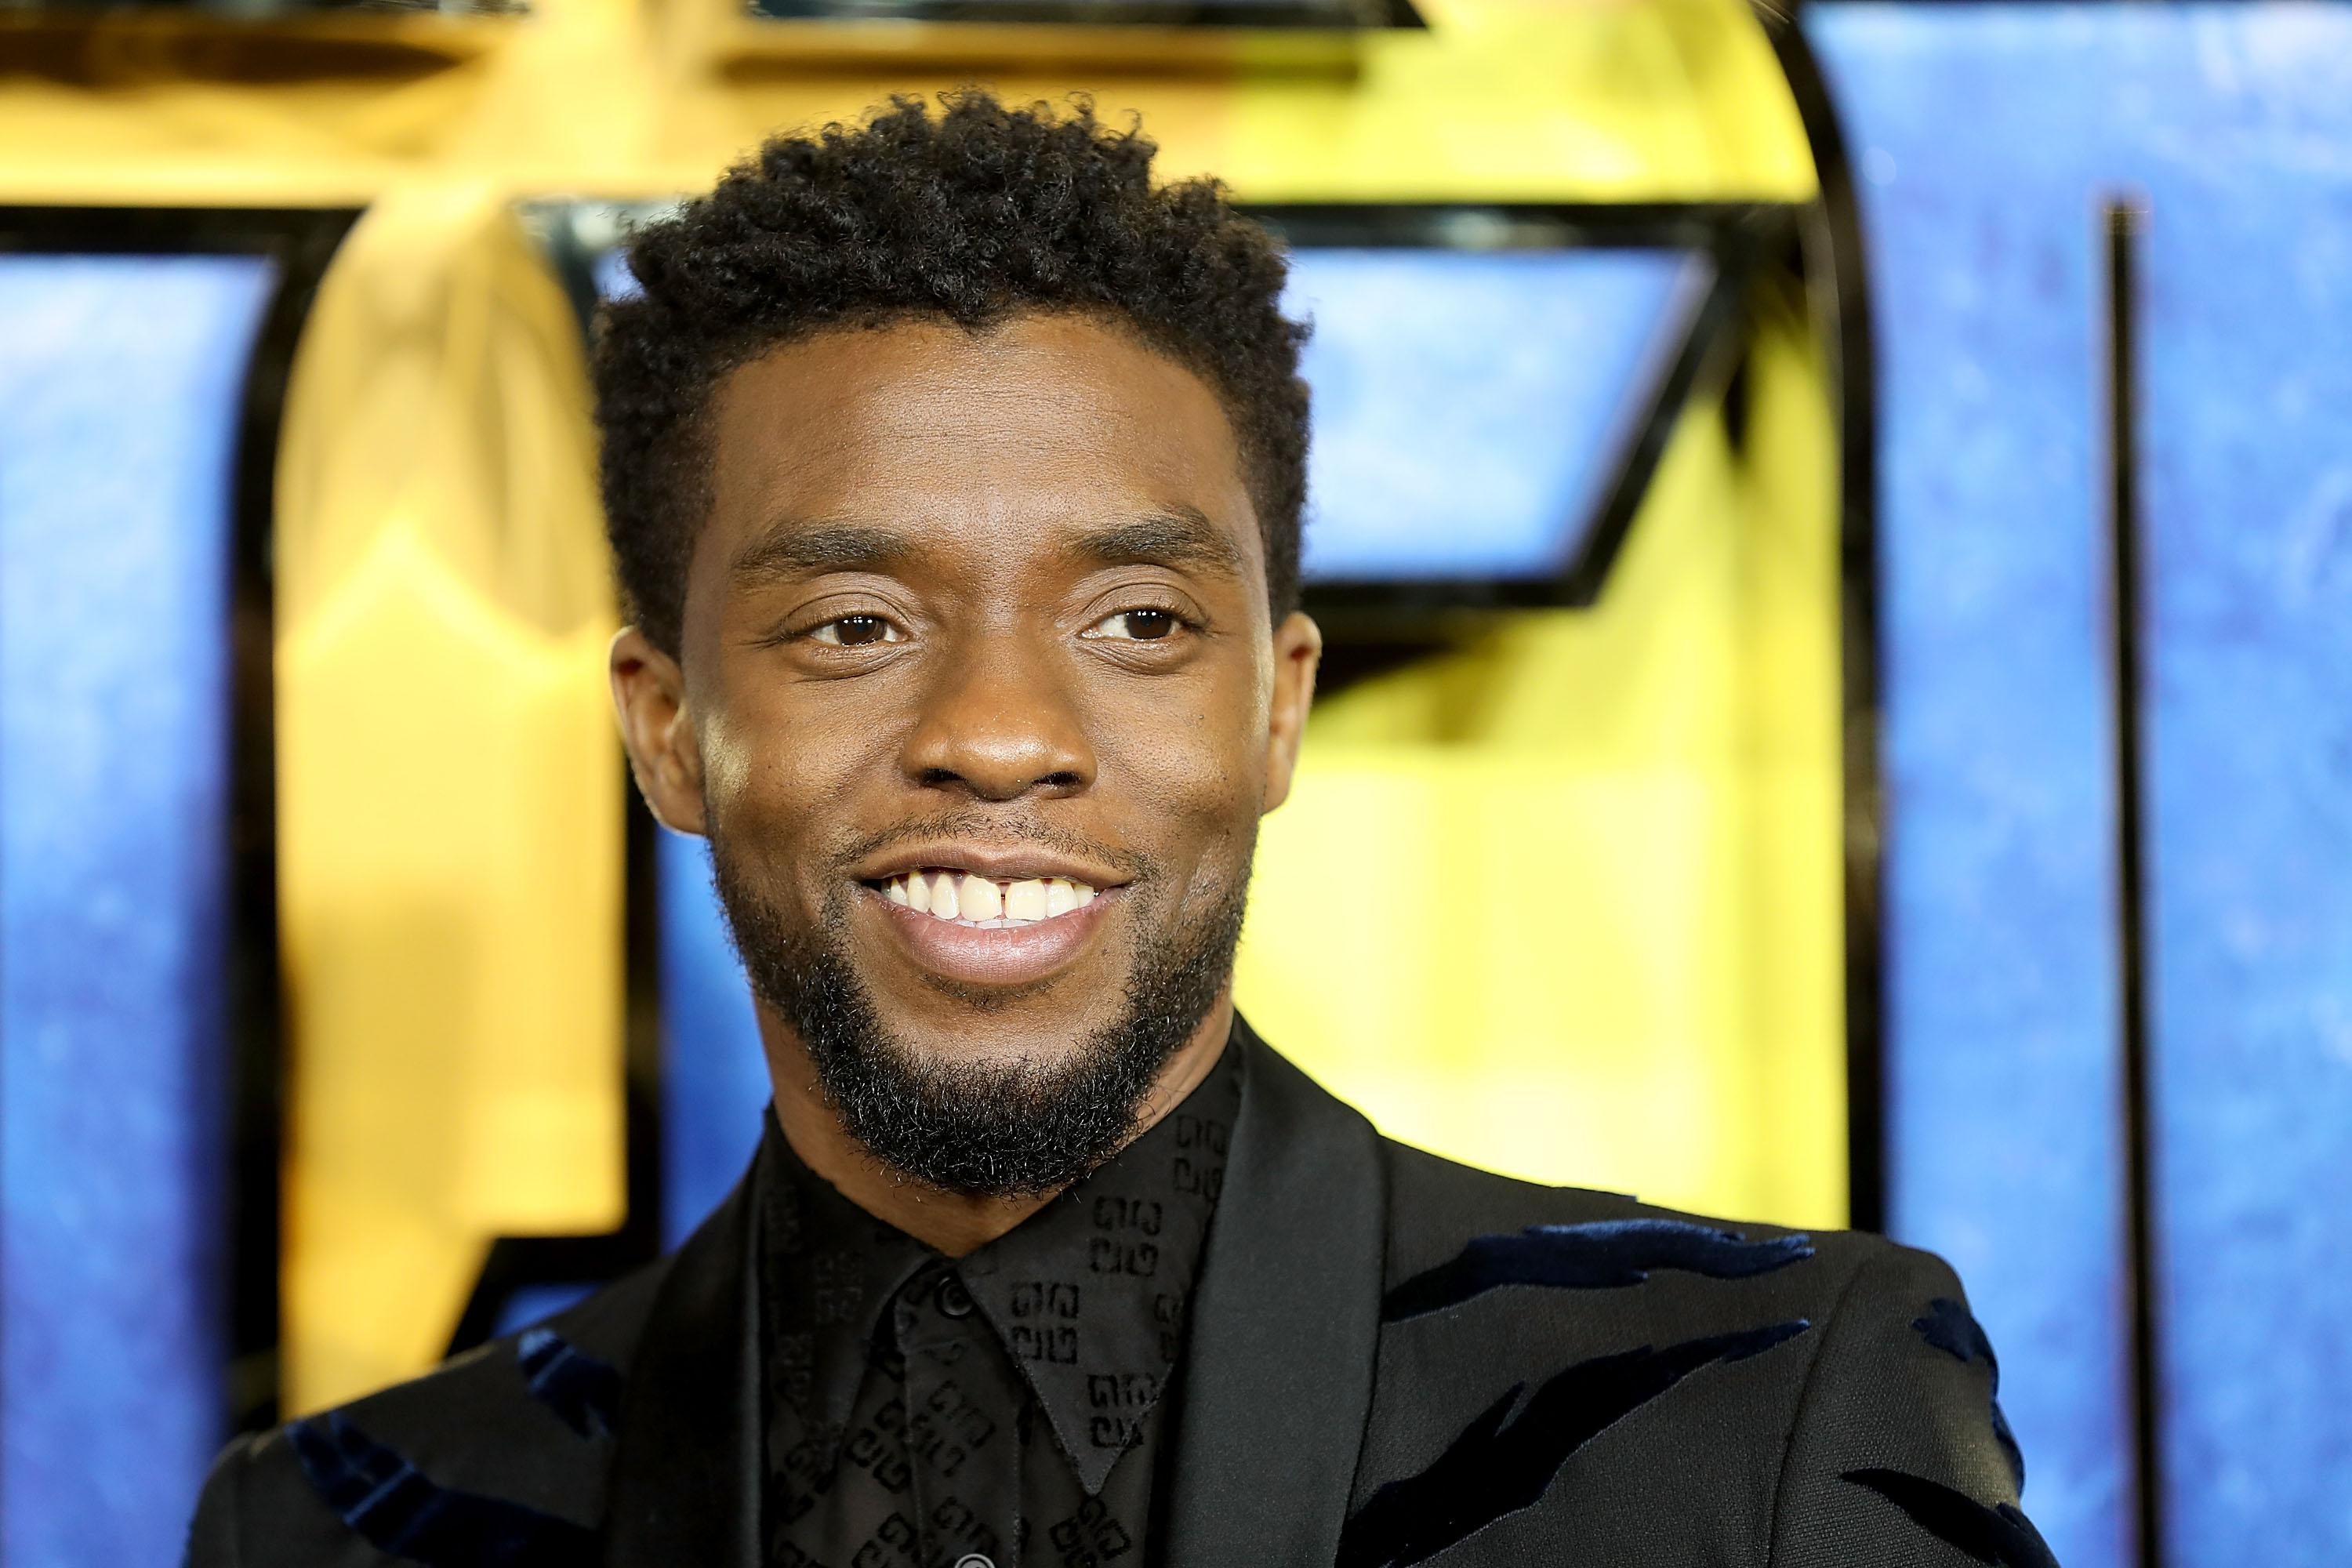 Actor Chadwick Boseman wearing a black suit in front of a blue curtain, smiling.